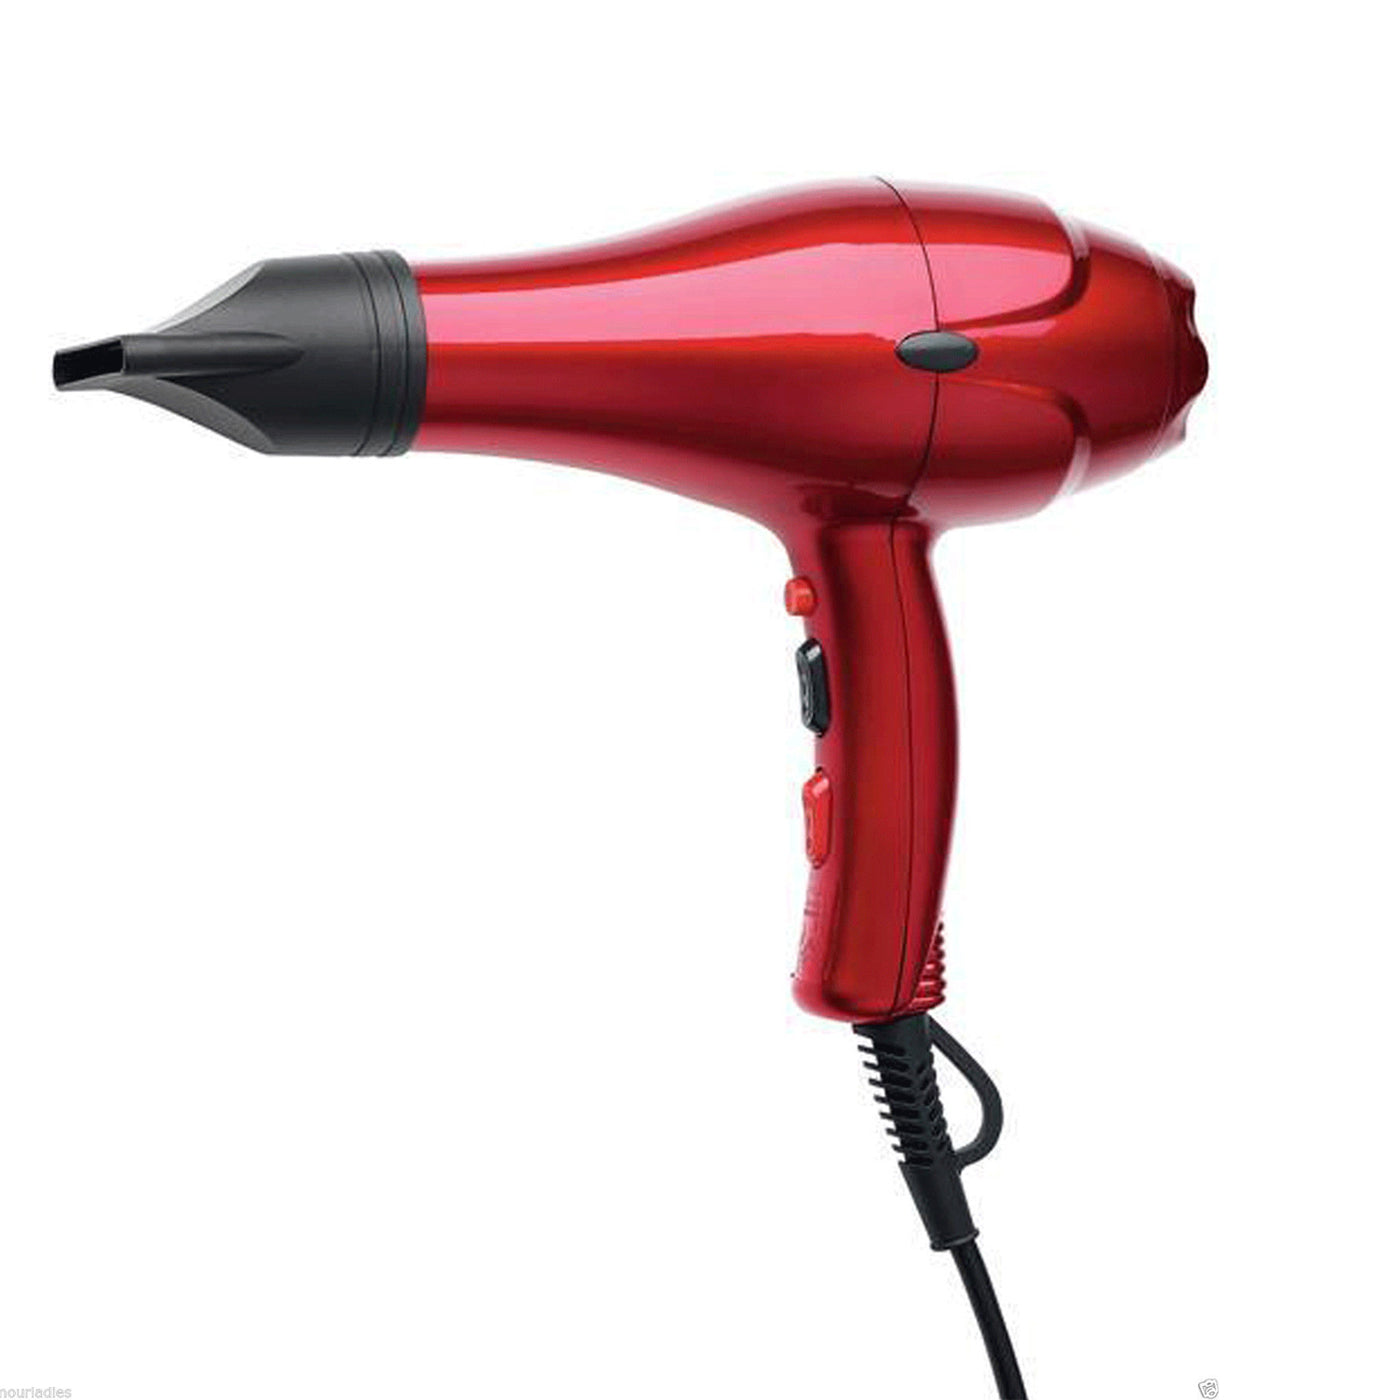 Dreox 2000w Dryer (Red) - Ultimate Hair and Beauty